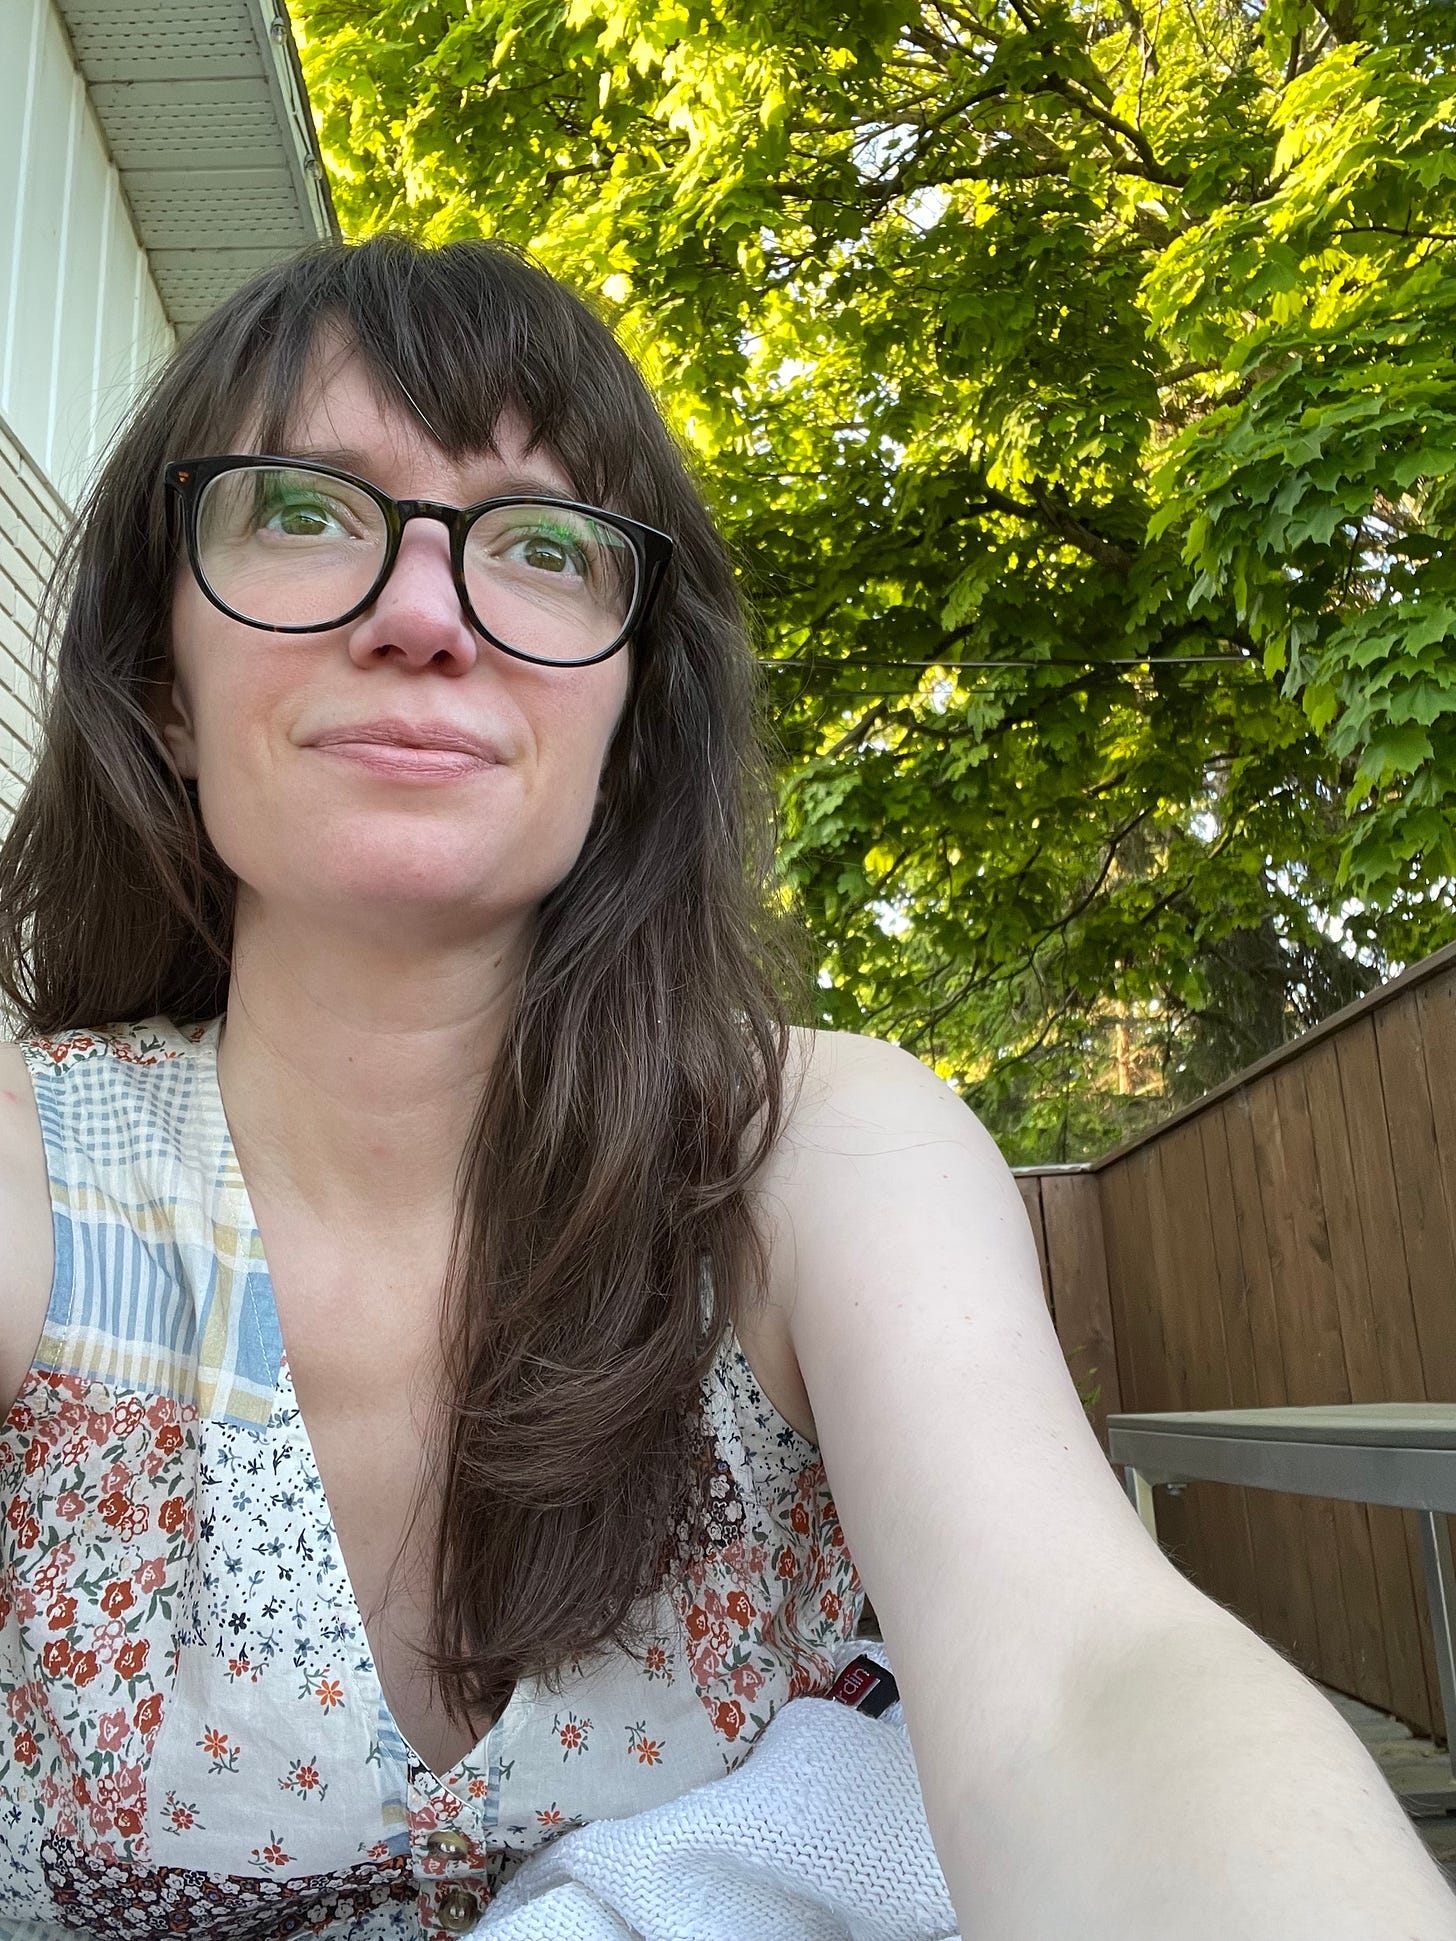 a white woman with long brown hair takes a selfie under a maple tree